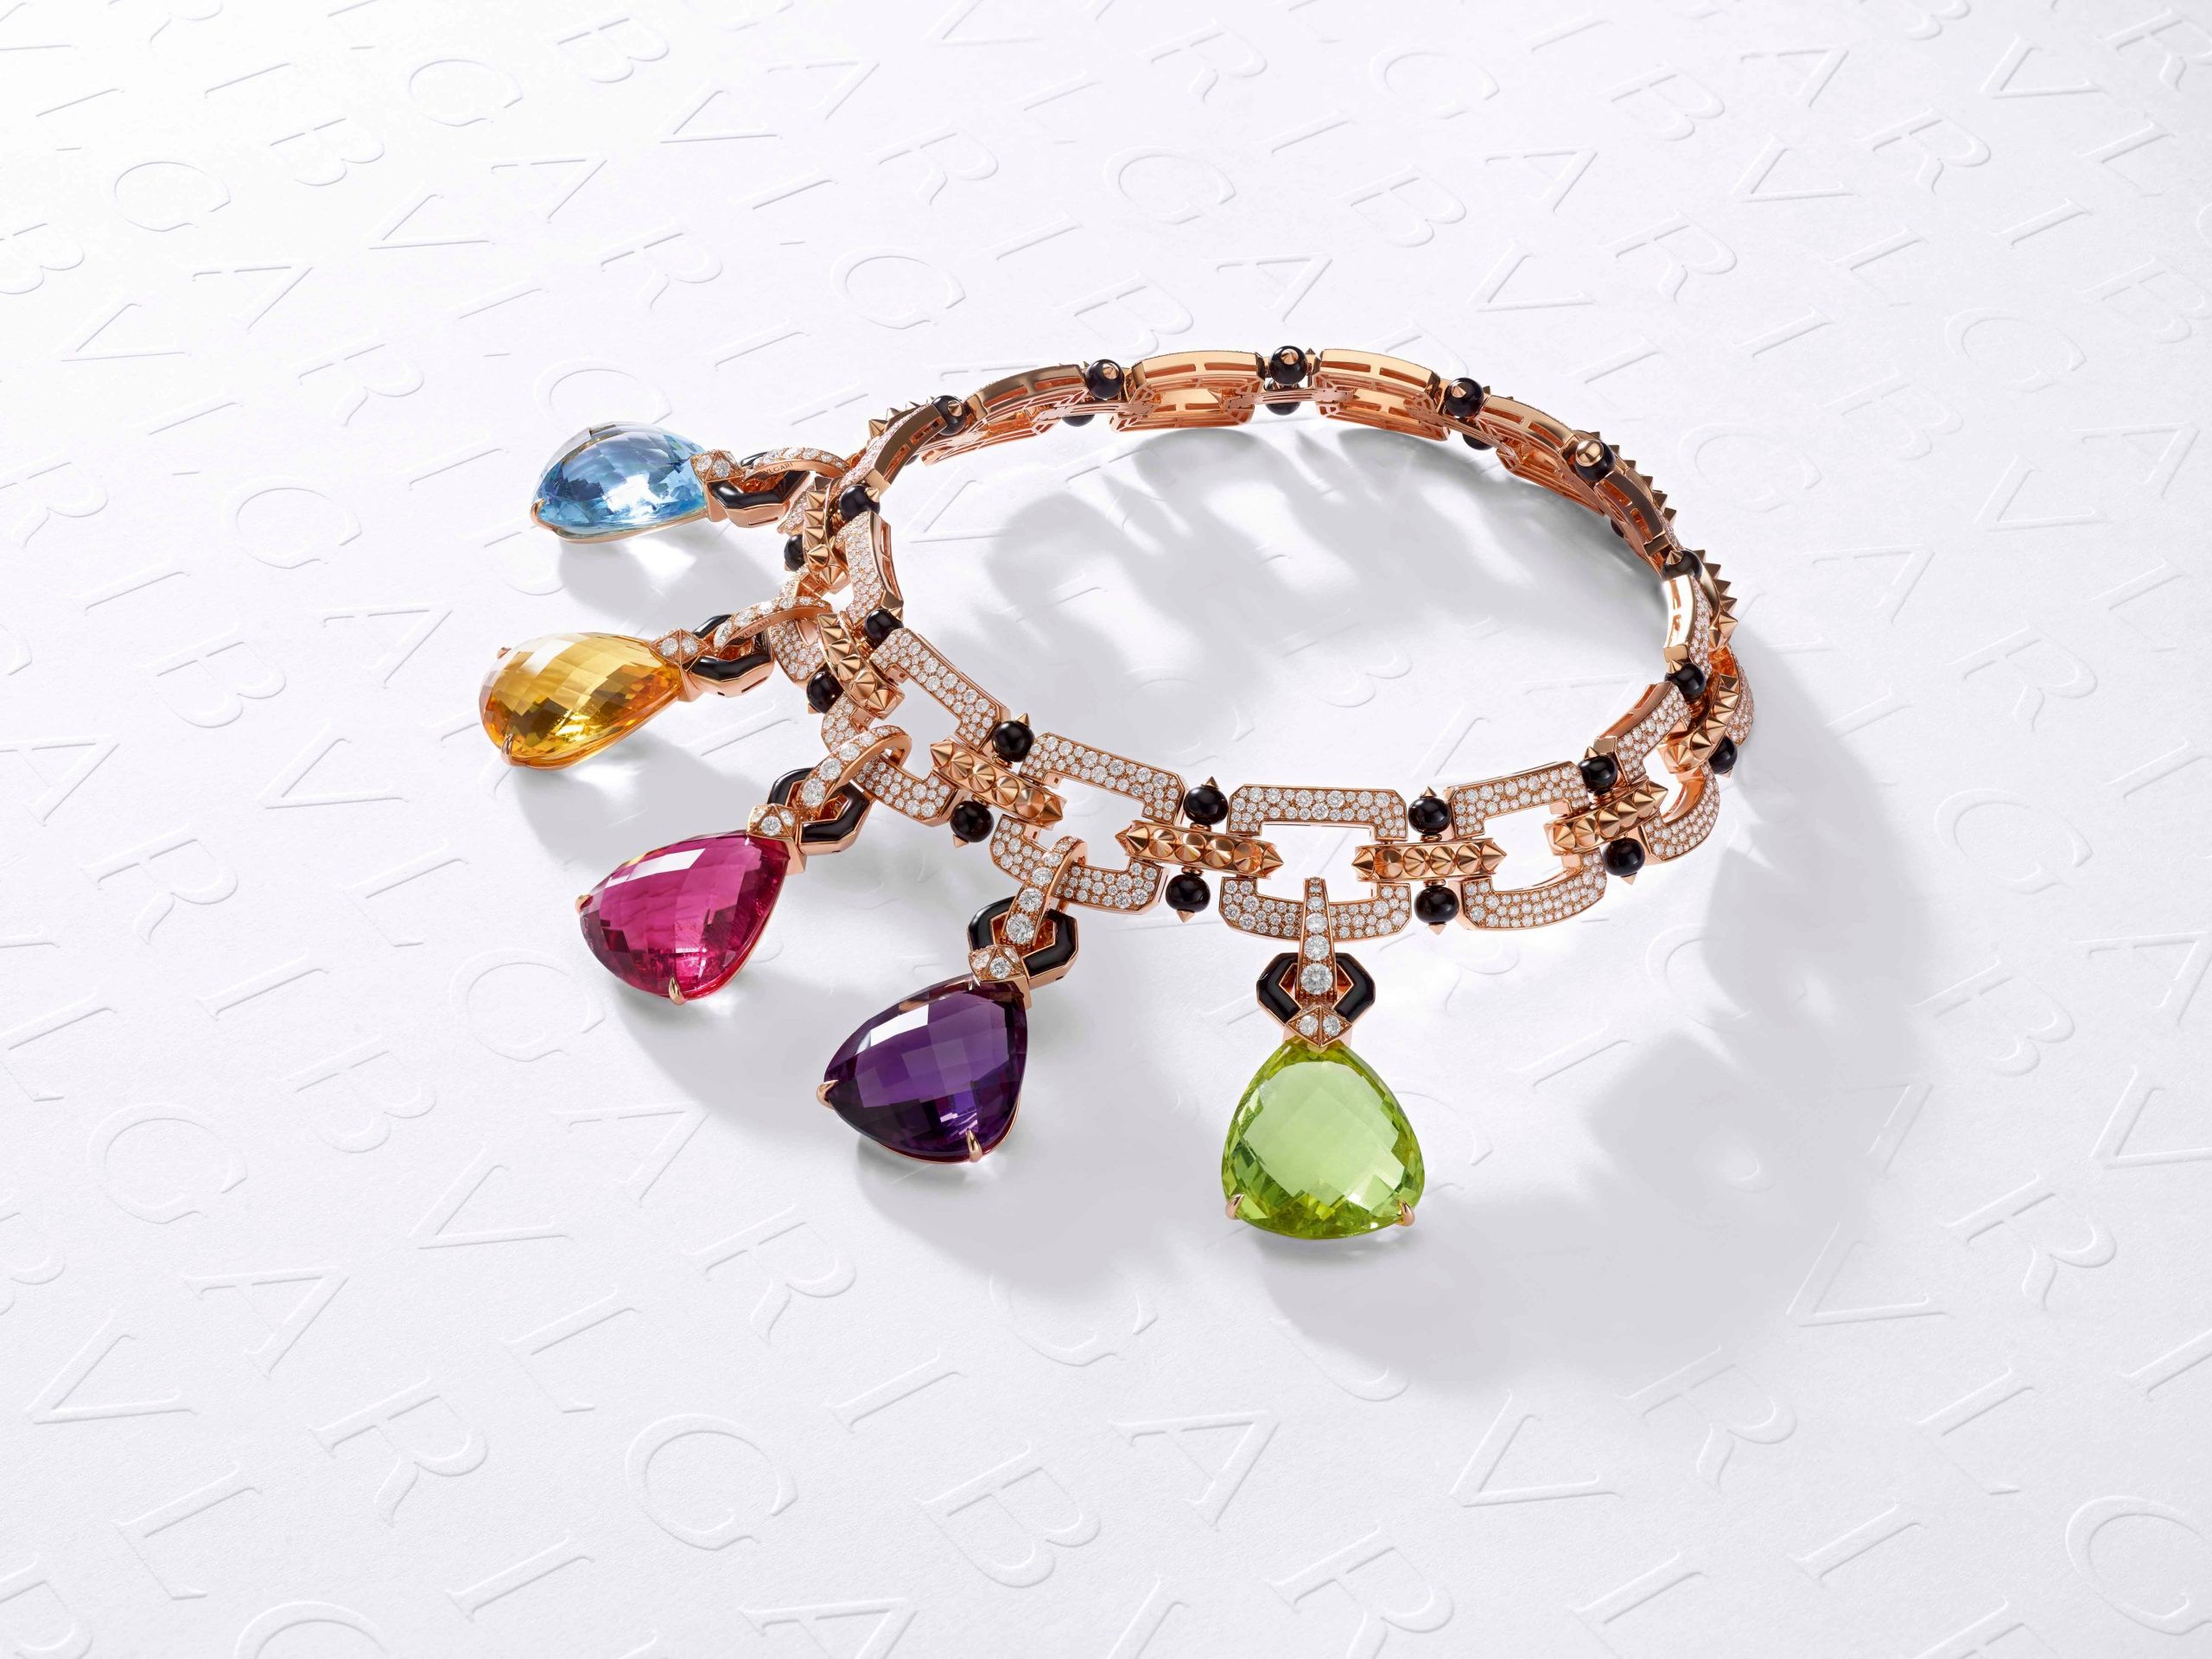 Bulgari's Latest High Jewelry Collection Pays Homage to Its